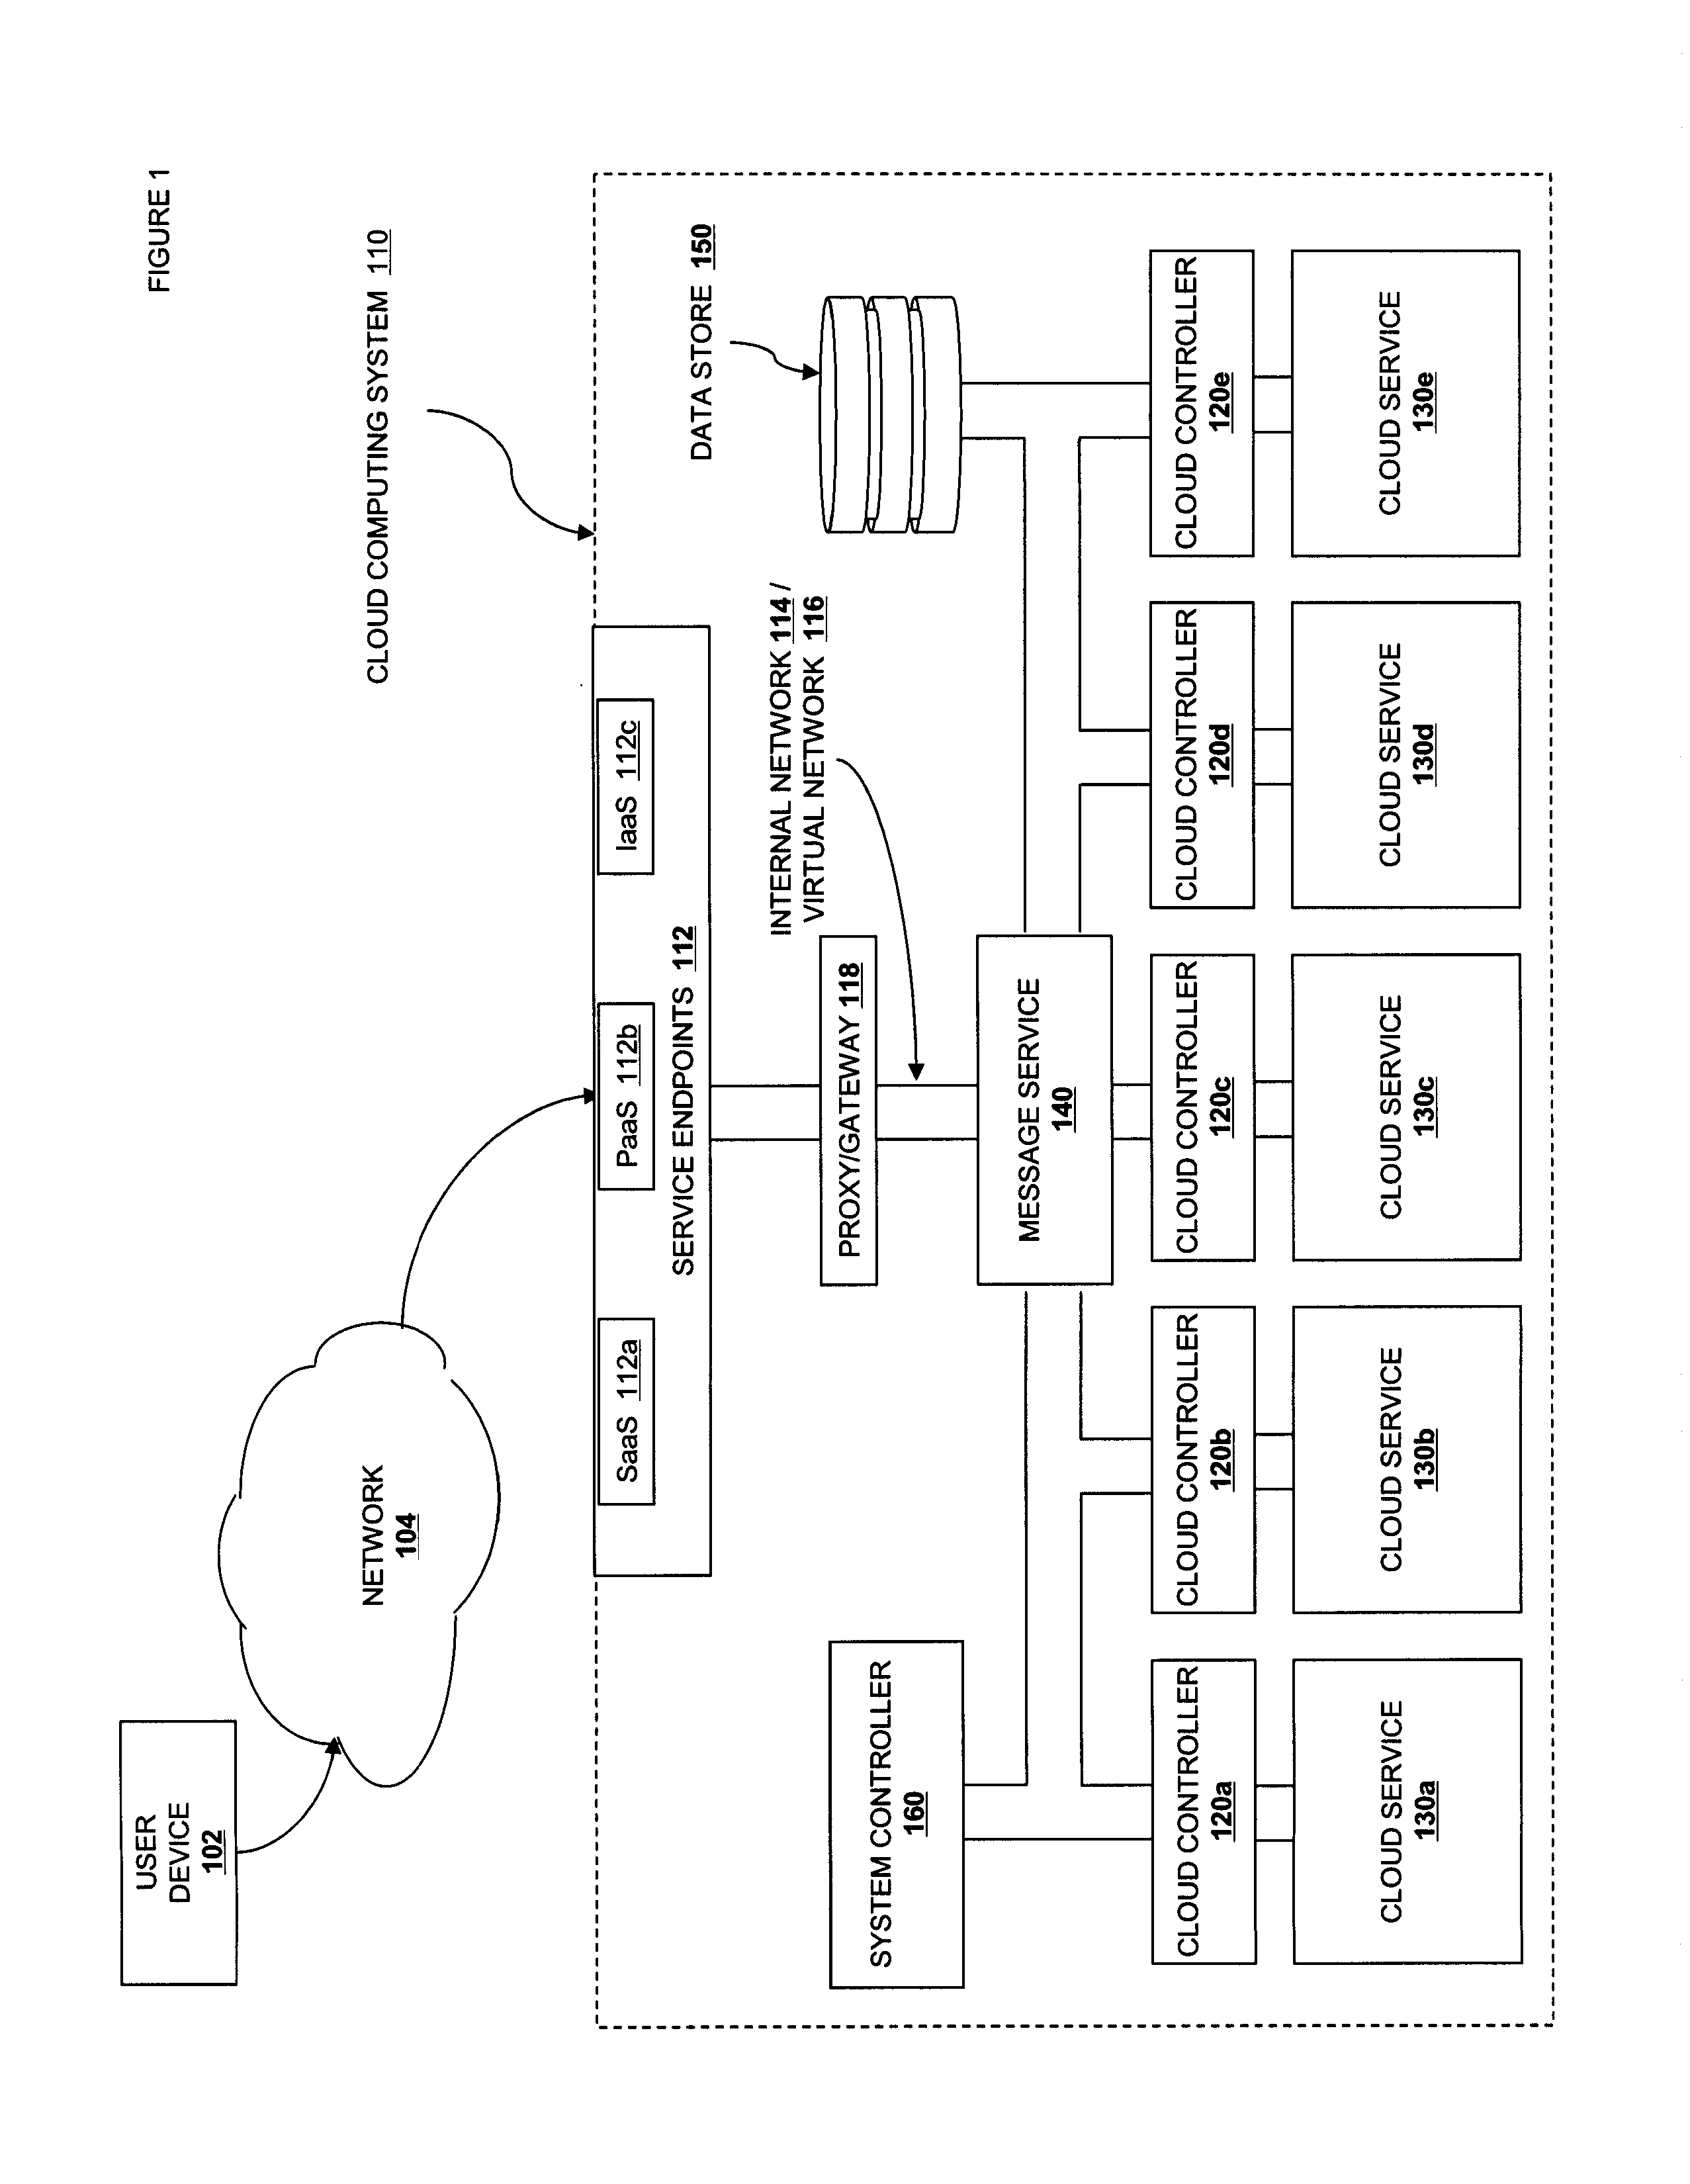 Method and System for Utilizing Spare Cloud Resources